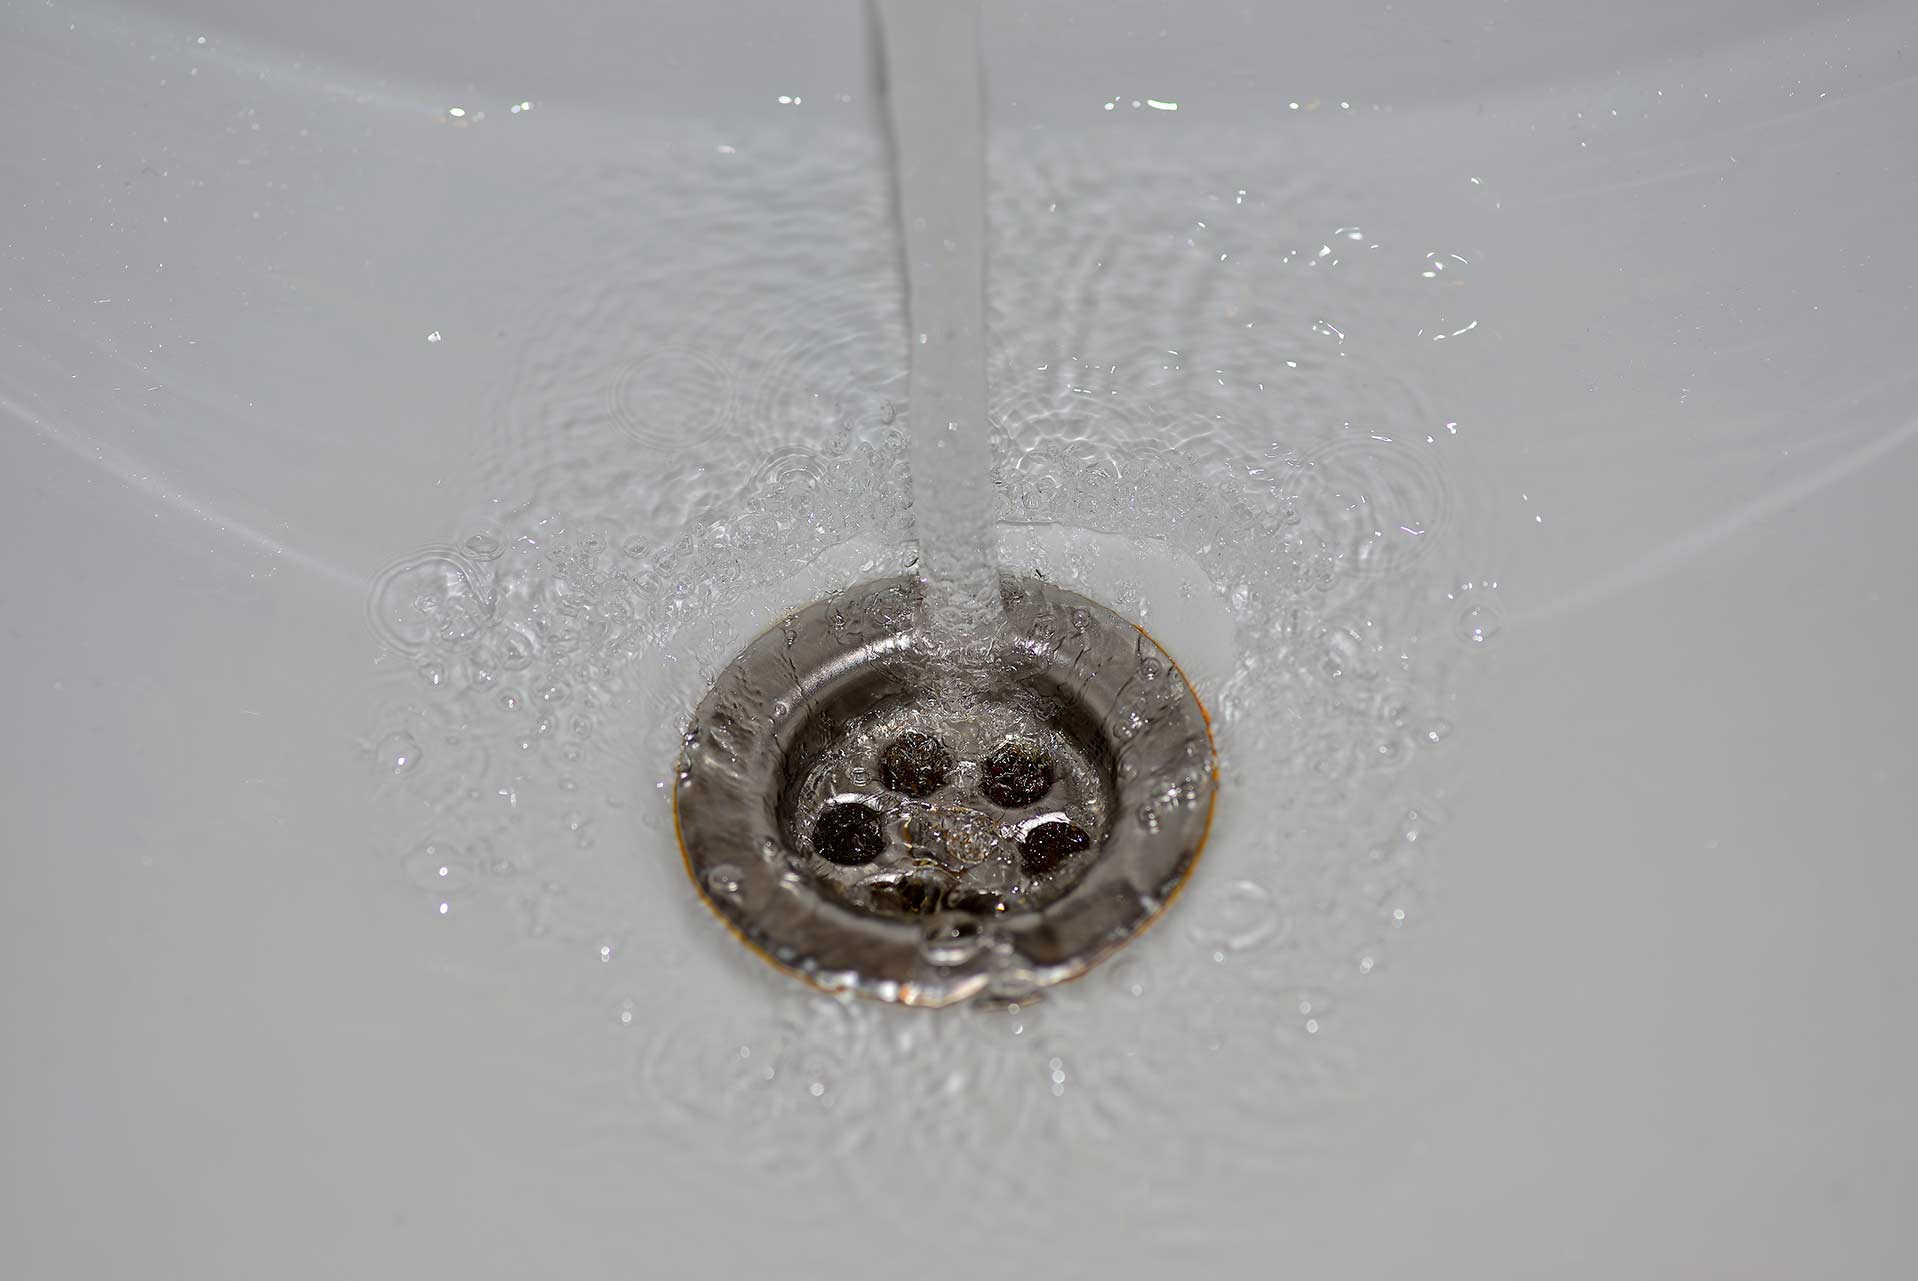 A2B Drains provides services to unblock blocked sinks and drains for properties in Harrogate.